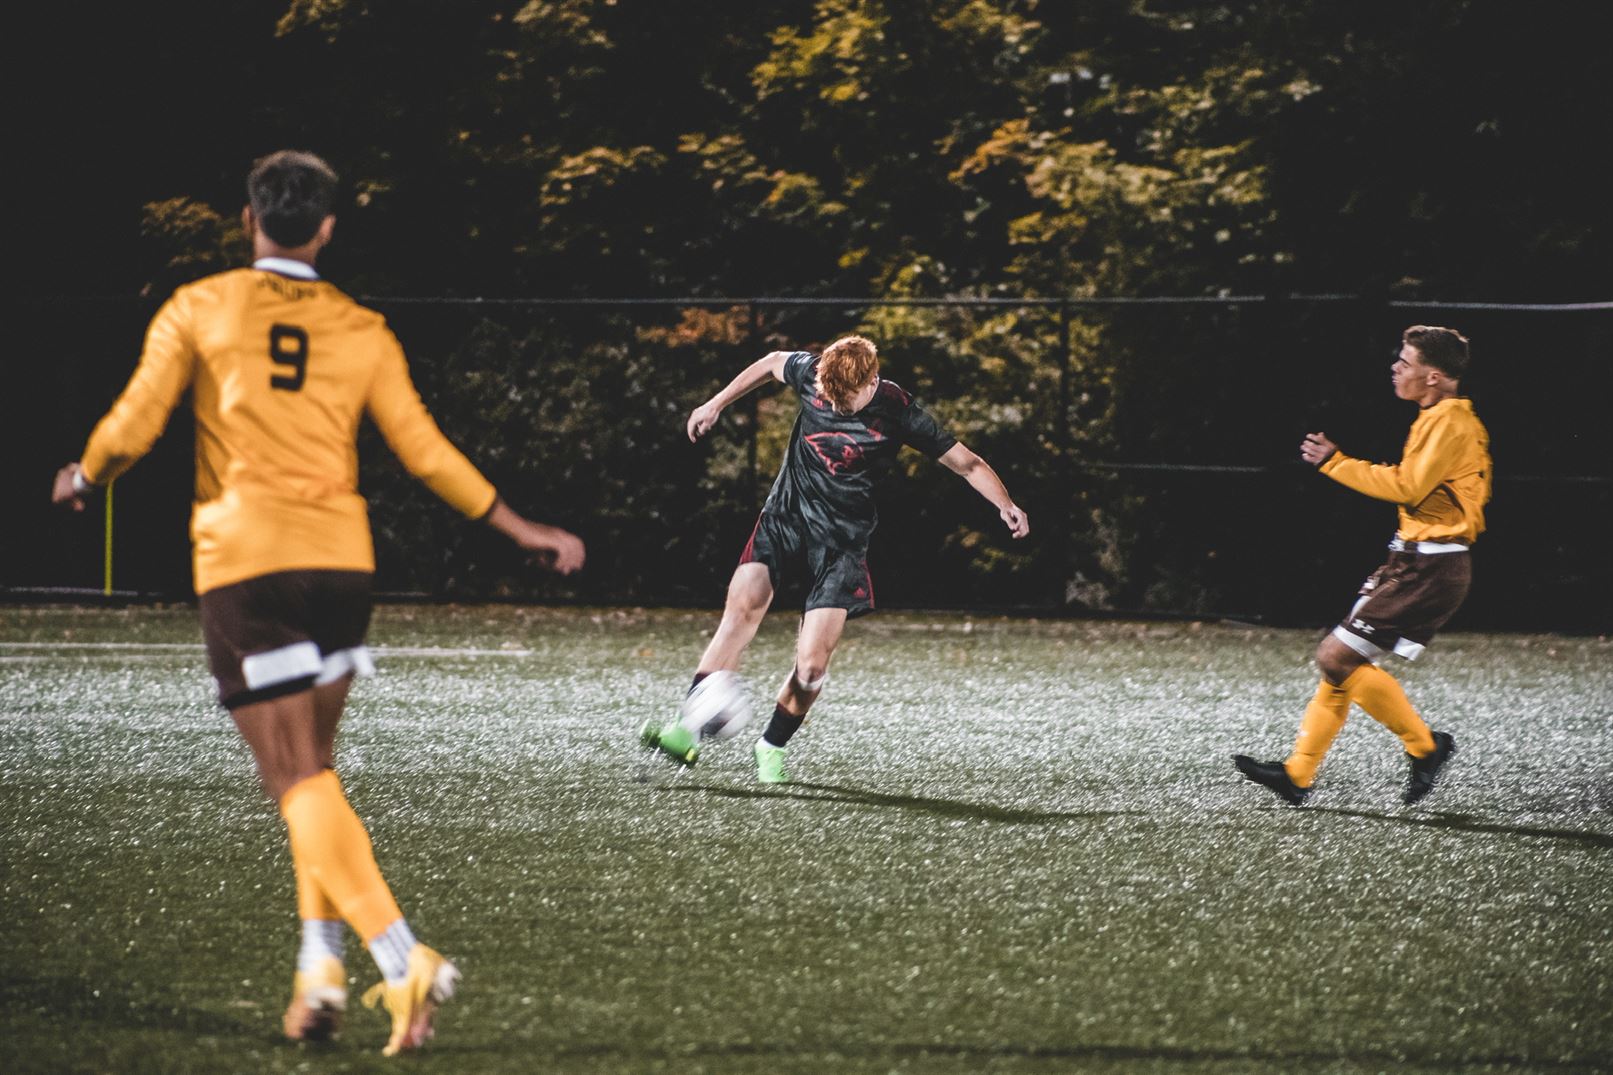 Ian Chesney looks to get past the defender and  kick the ball. Dan Dreisbach | The Montclarion